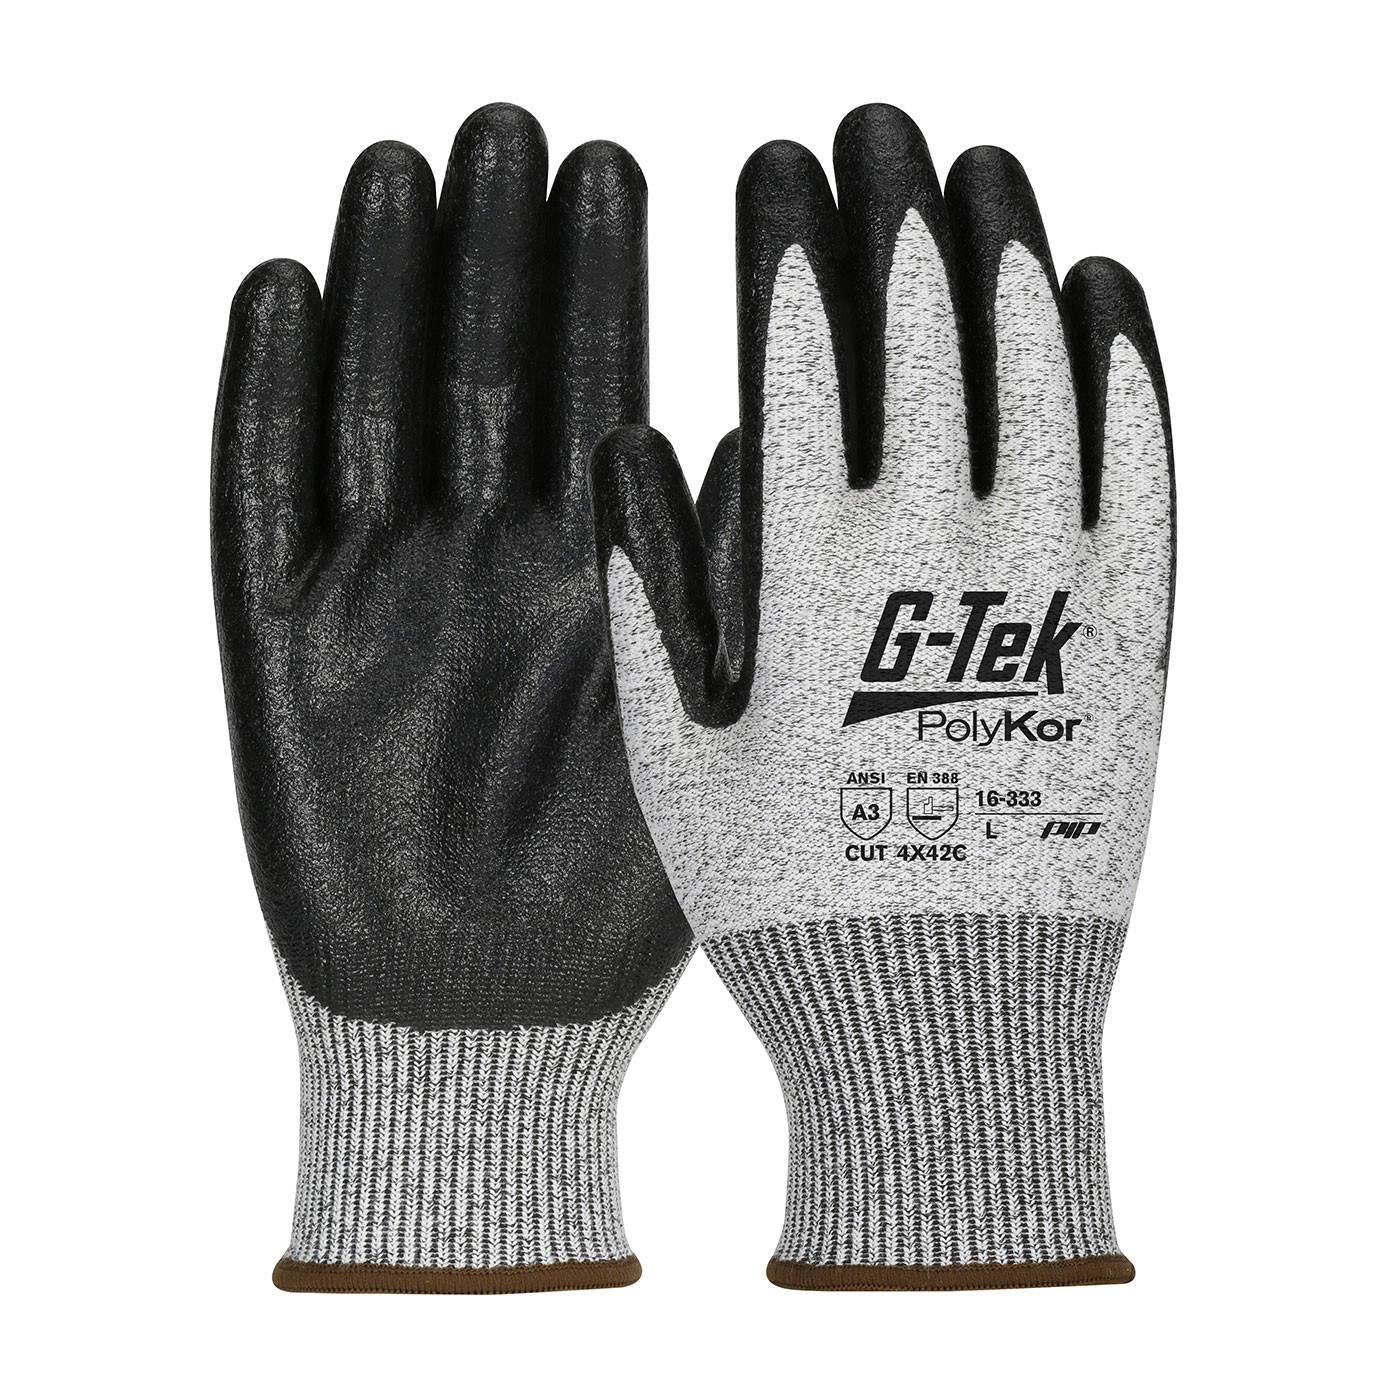 G-Tek® PolyKor® Seamless Knit PolyKor® Blended Glove with Nitrile Coated MicroSurface Grip on Palm & Fingers  (#16-333)